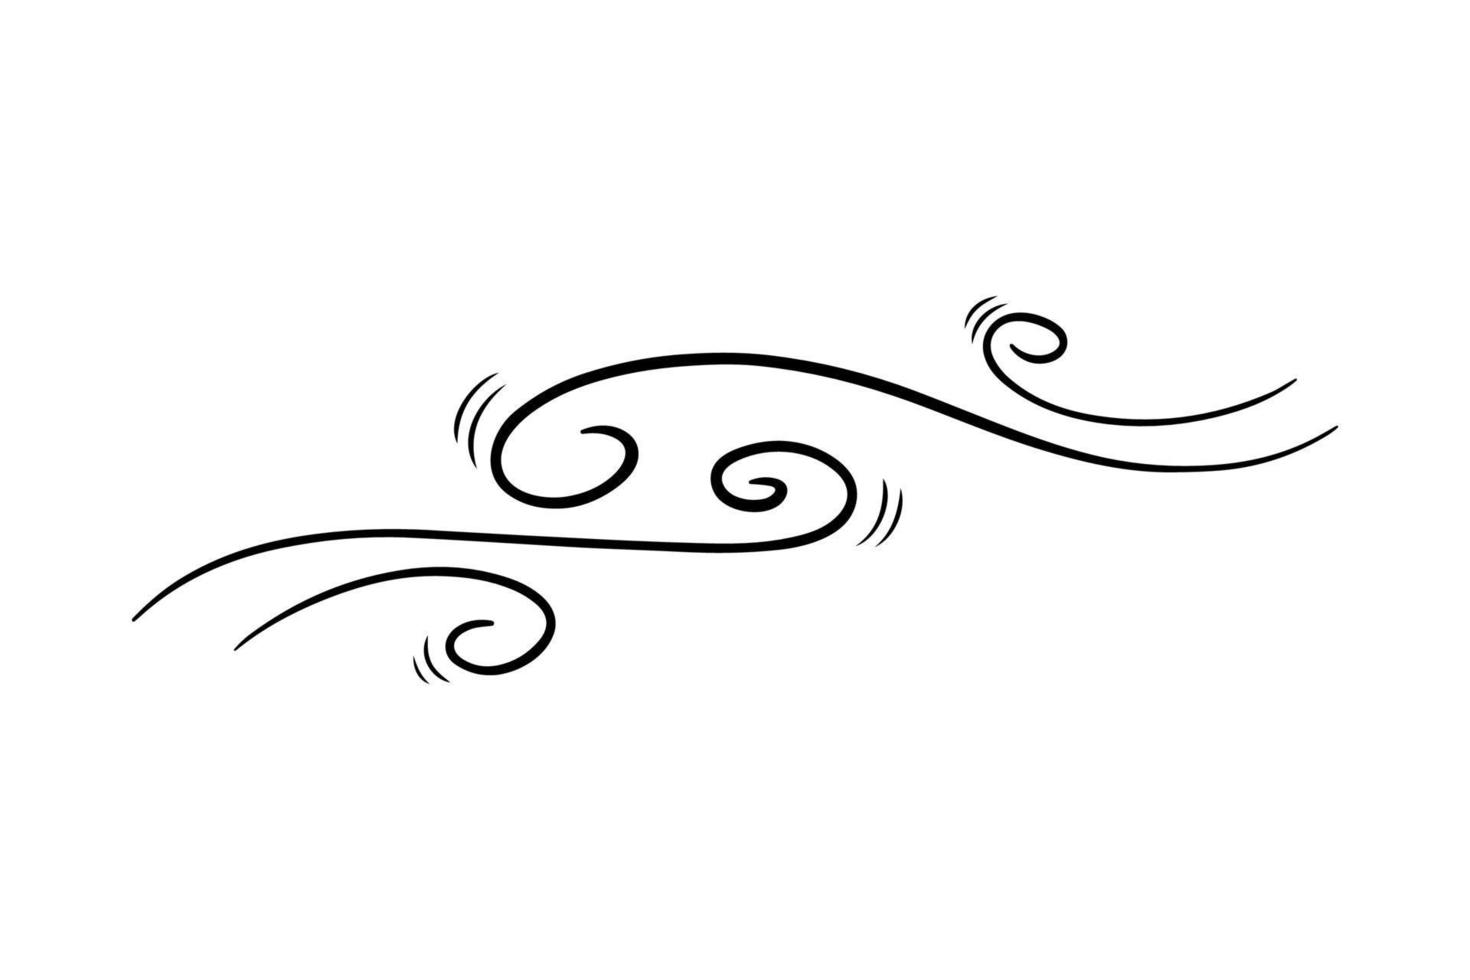 Wind blow in doodle style, vector illustration. Wave cold air during windy weather. Gust symbol outline for print and design .Isolated black line element on a white background